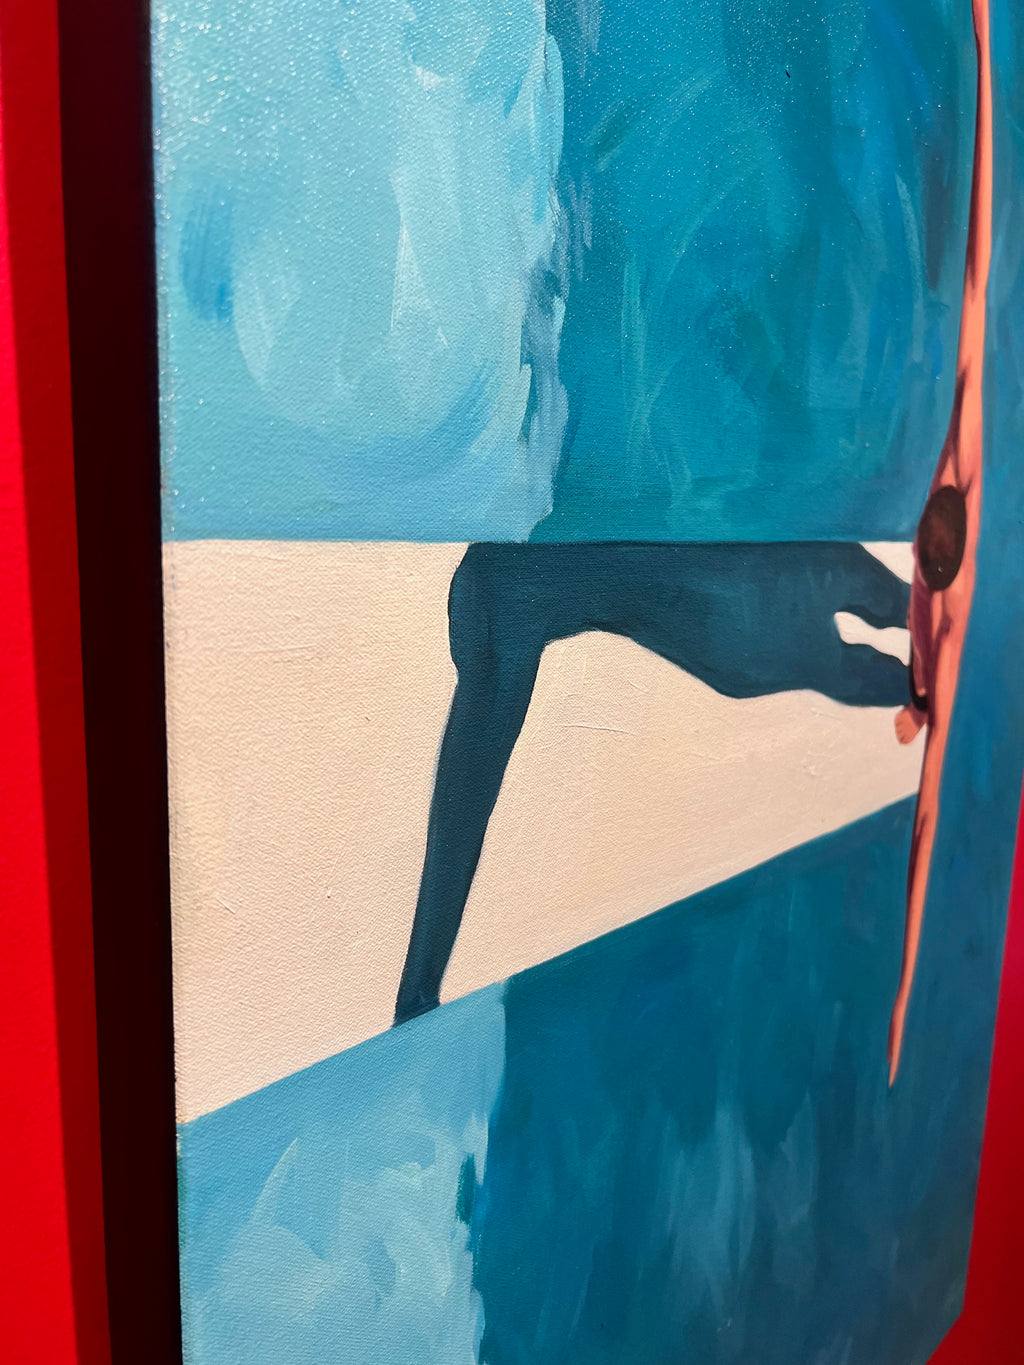 Vertical oil painting of a man standing on a diving board over turquoise water from above